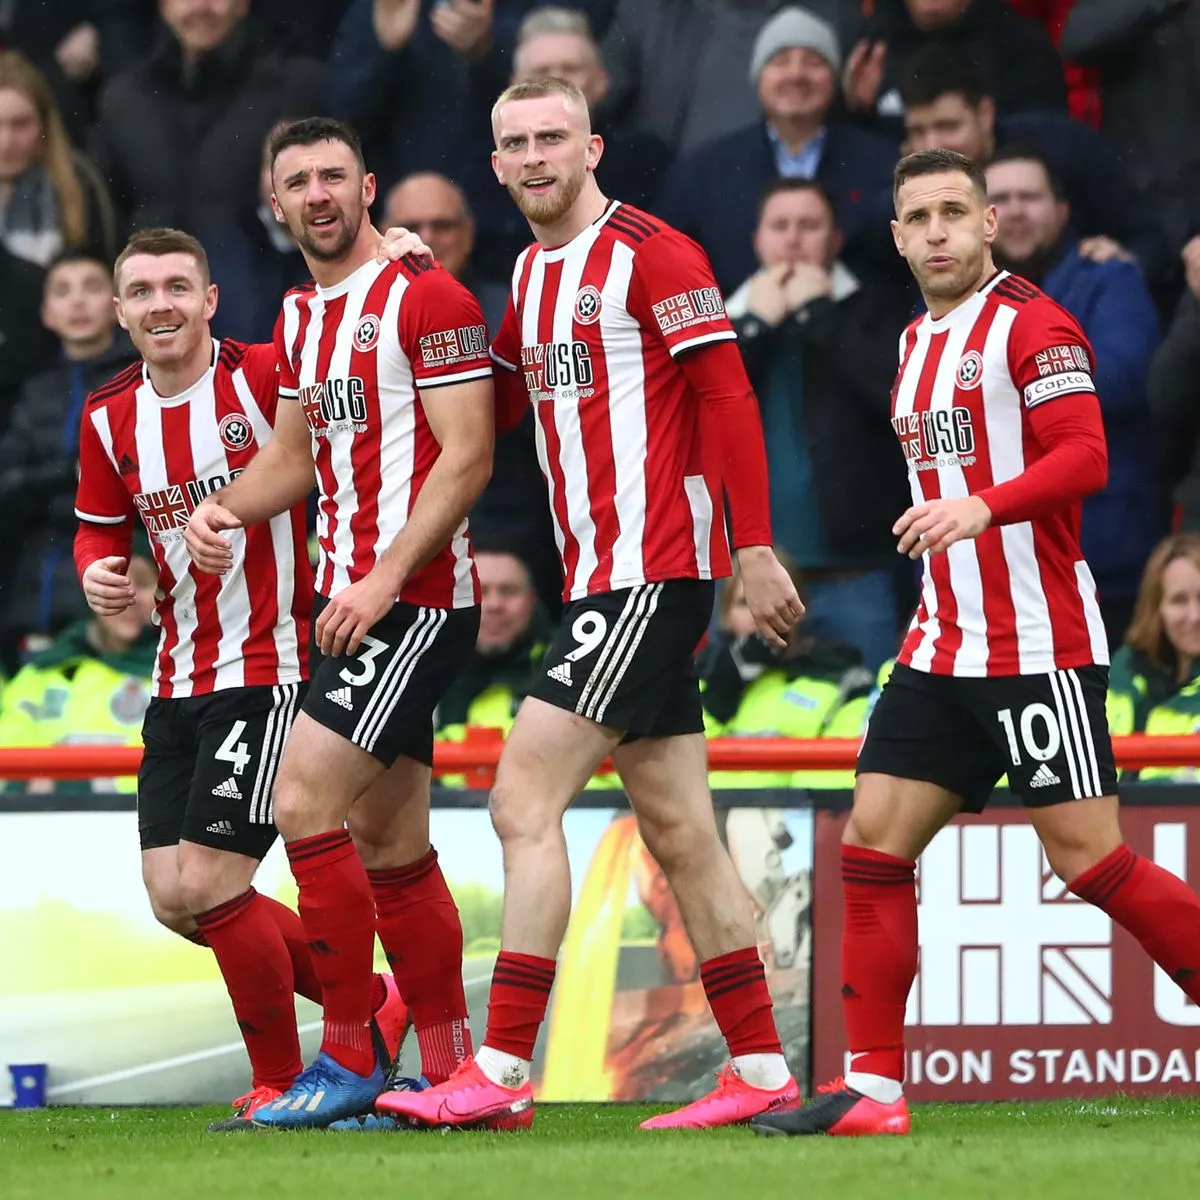 According to BBC report: Sheffield United star blushed because of Newcastle United’s pre-match  confession